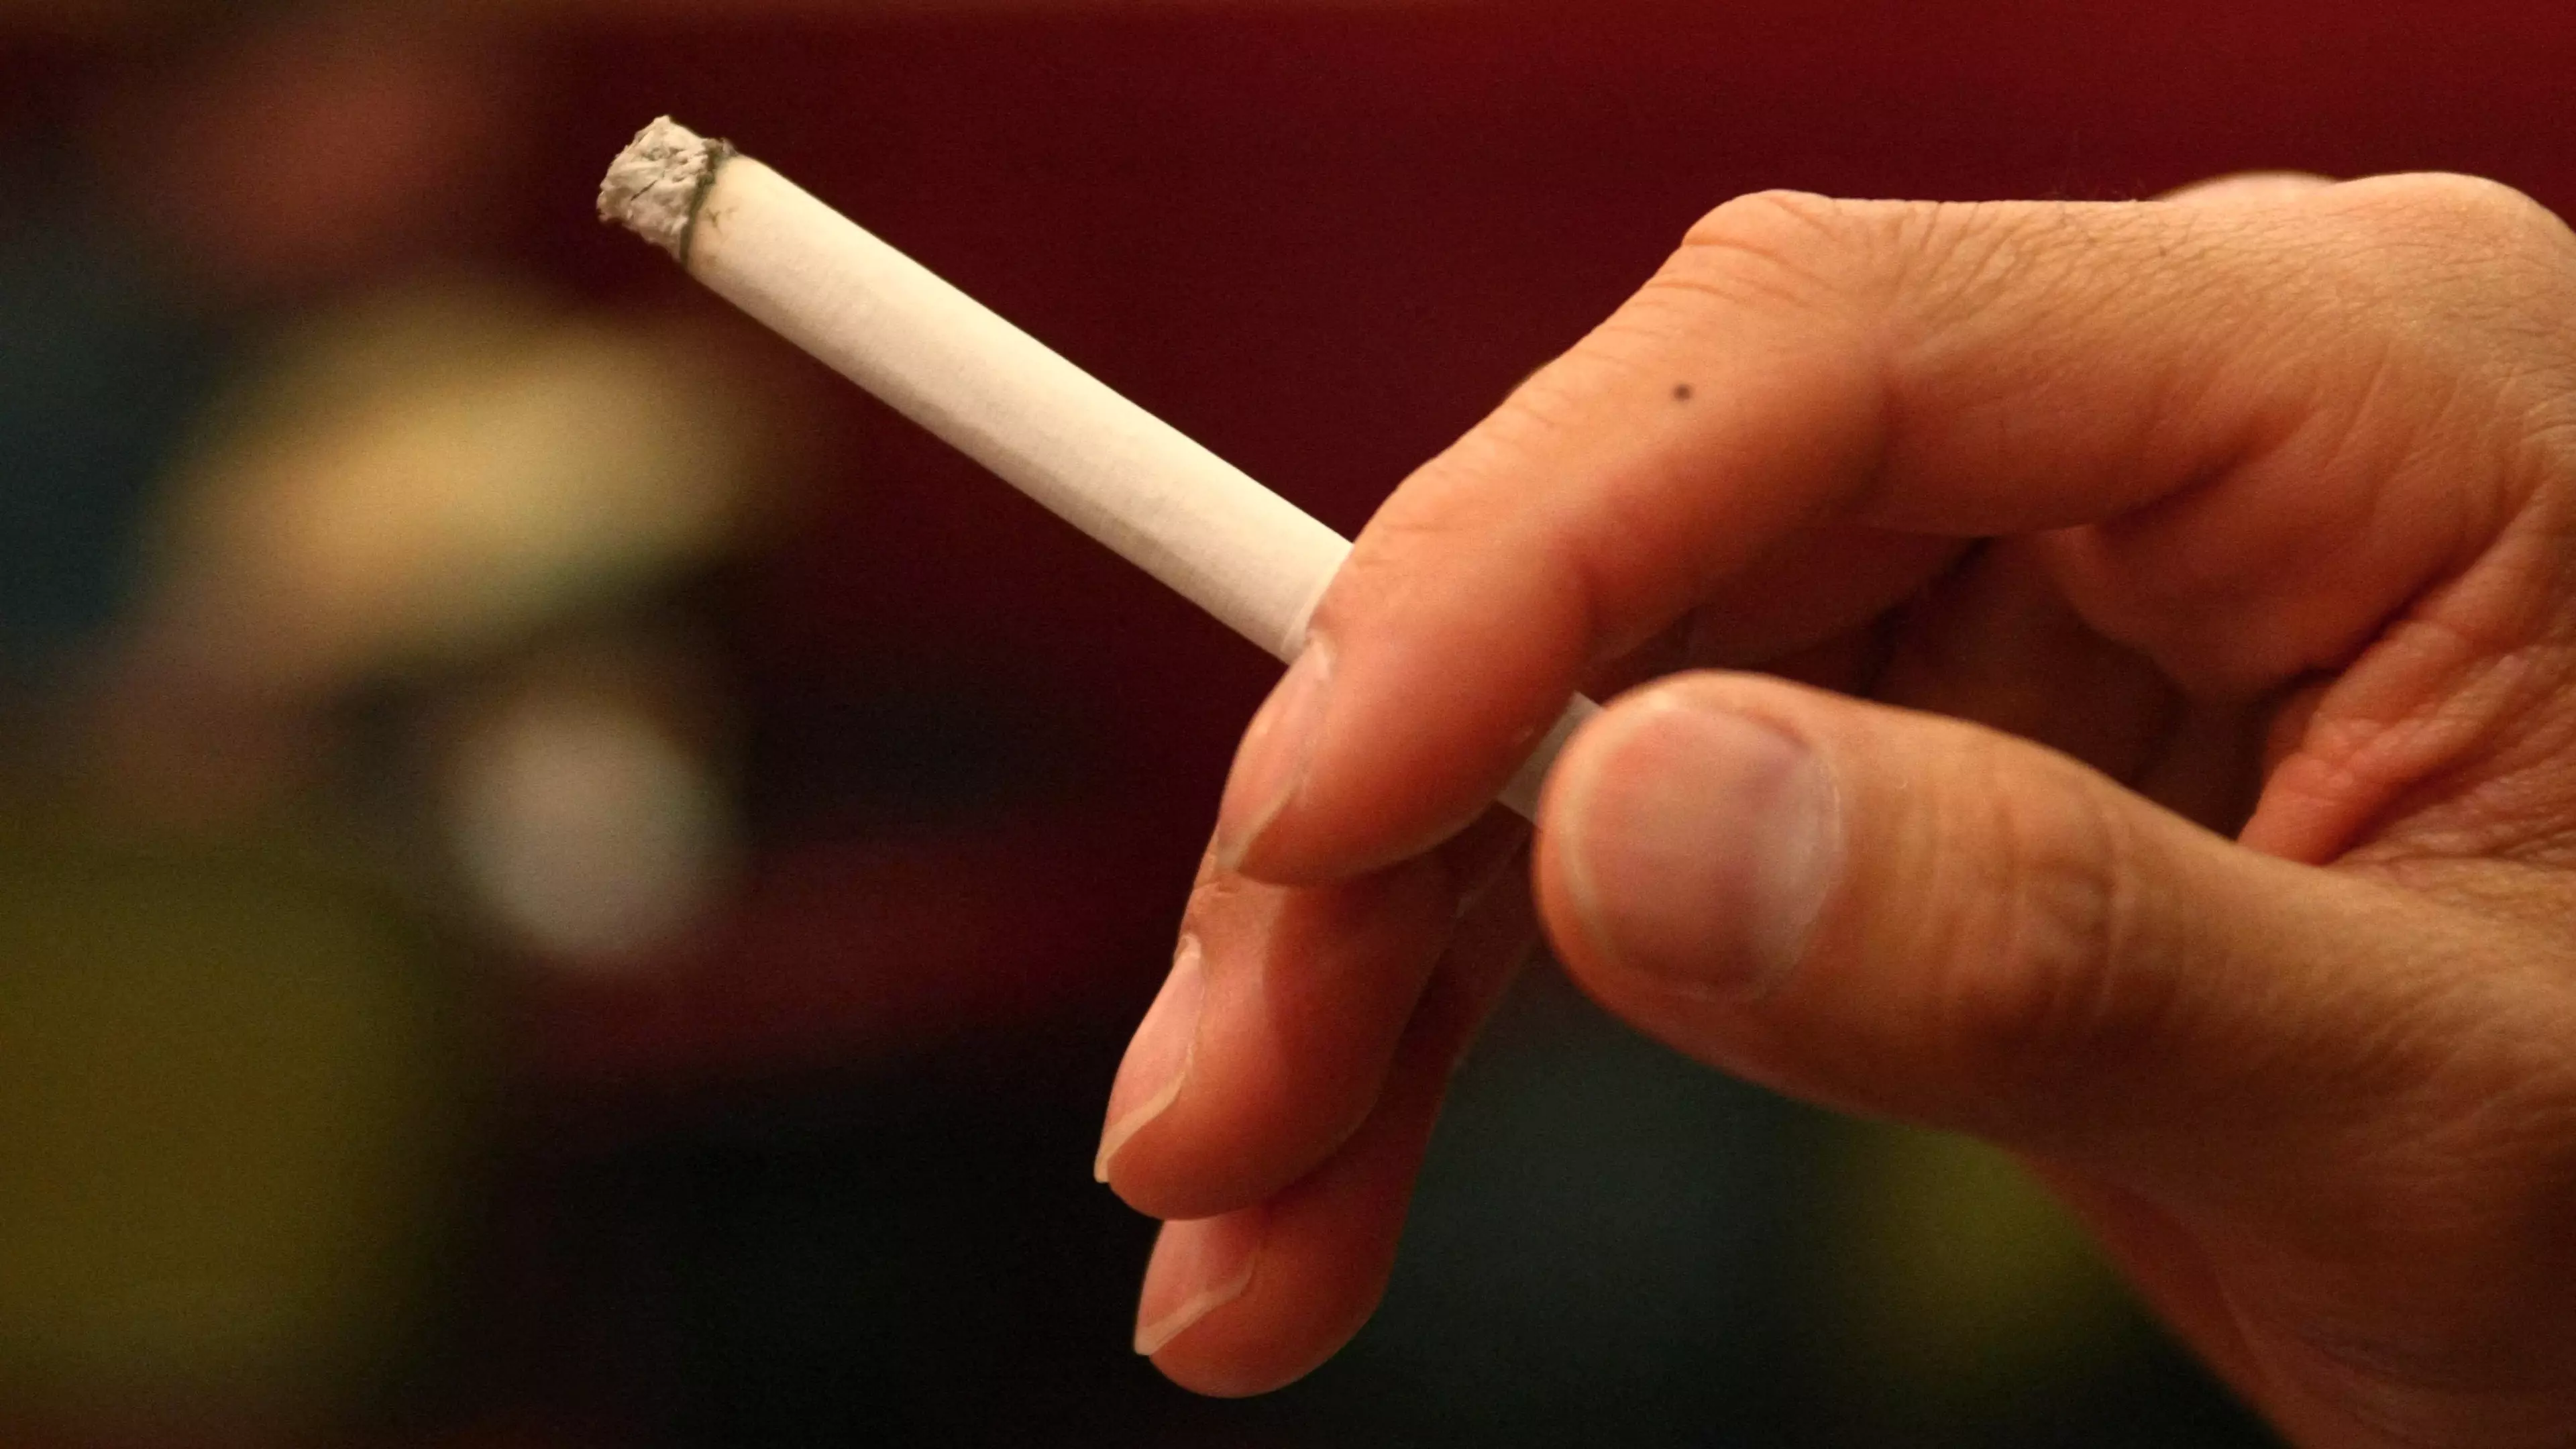 Sale Of Menthol Cigarettes To Be Banned In UK From Today